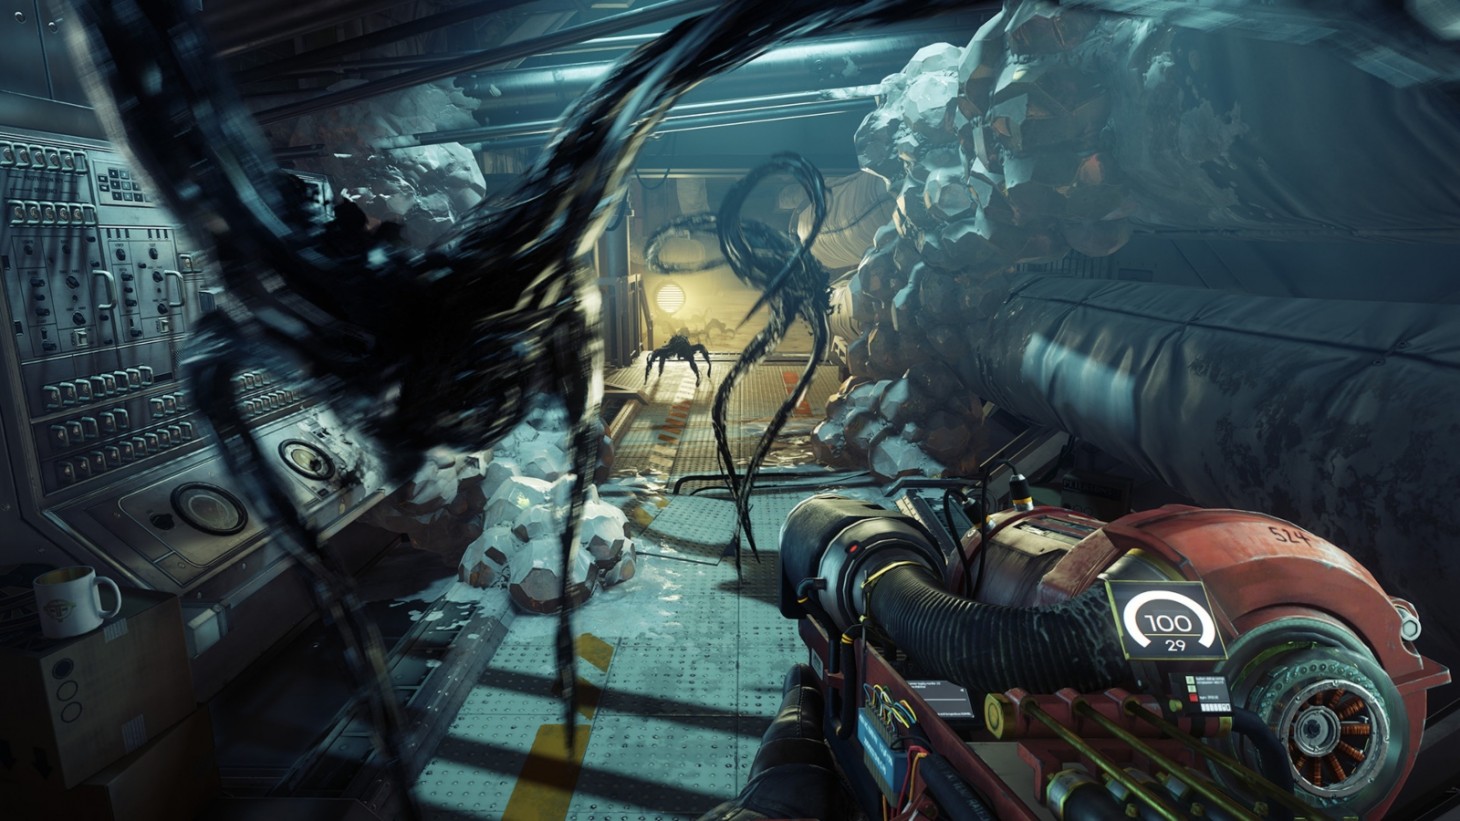 You Can Grab Prey For Free On The Epic Games Store - Game Informer